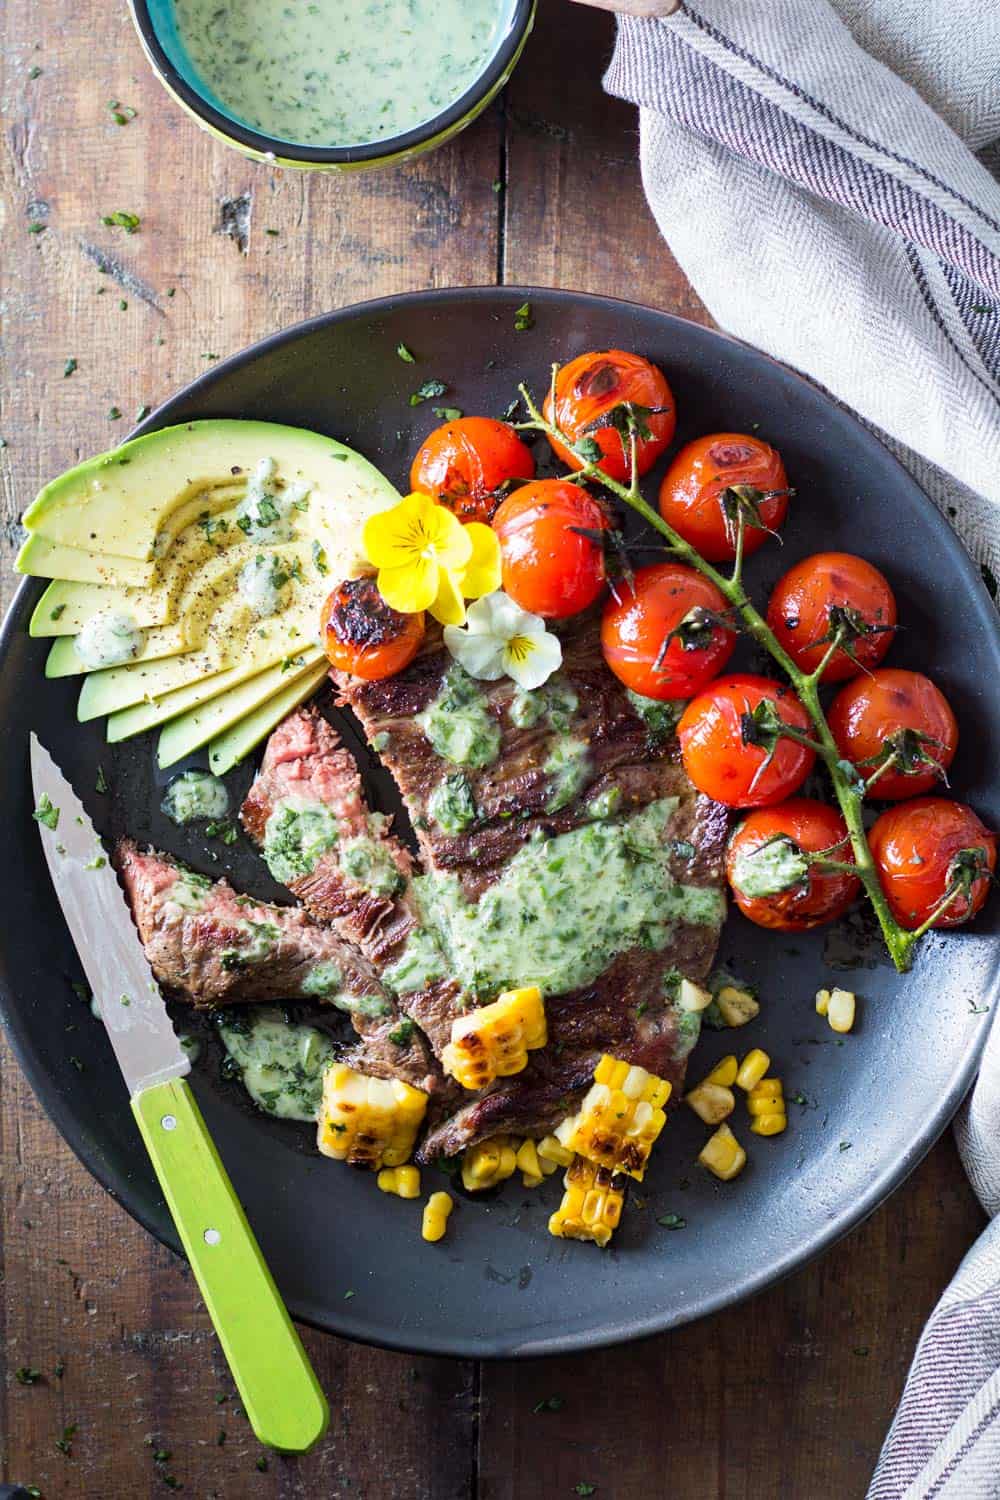 Skirt Steak with Basil Cream and Grilled Tomatoes, corn kernels and sliced avocado, a knife, and a jar of Basil Cream.